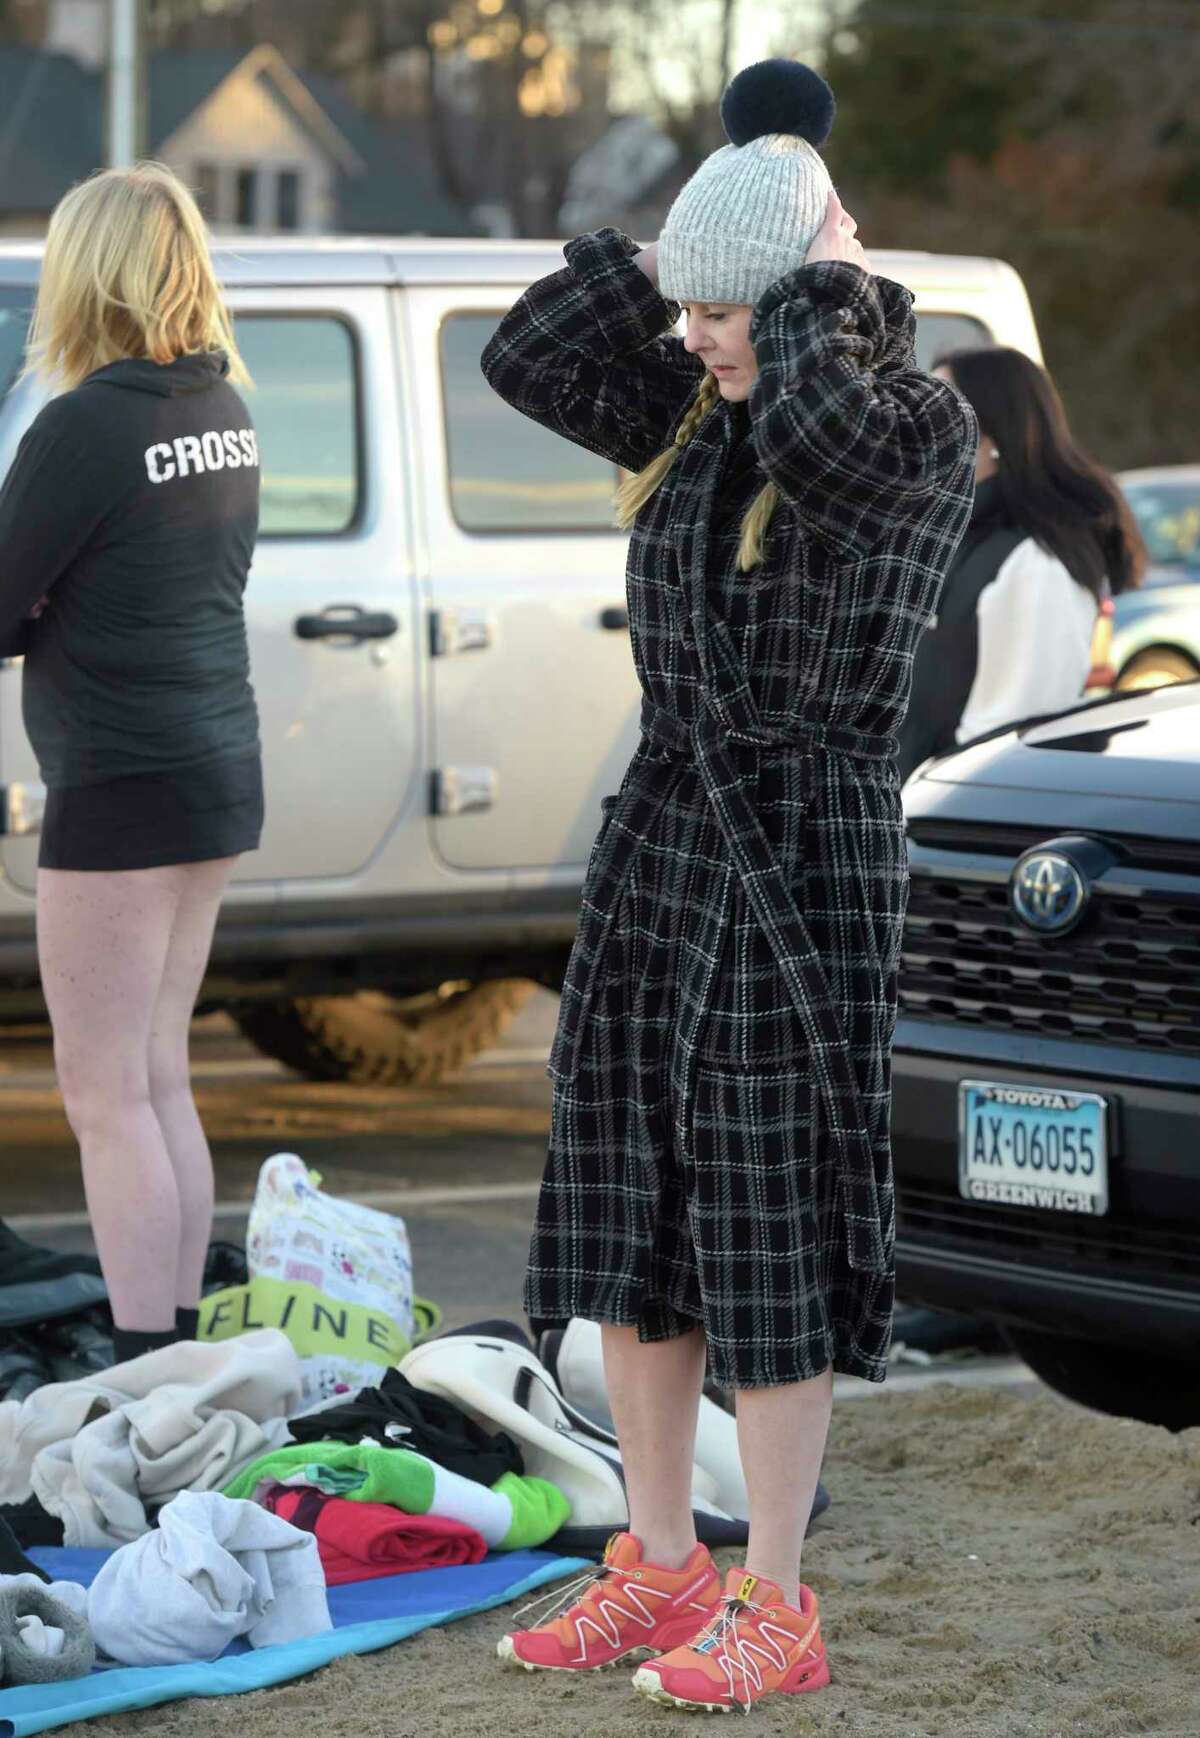 Victoria Marsh, of Stamford, gets ready to participate in a polar plunge at Pear Tree Point Beach. The plunge, organized by Carozza Fitness owner Michael Carozza, benefited Animals R Us. Sunday, January 1, 2023, Darien, Conn.